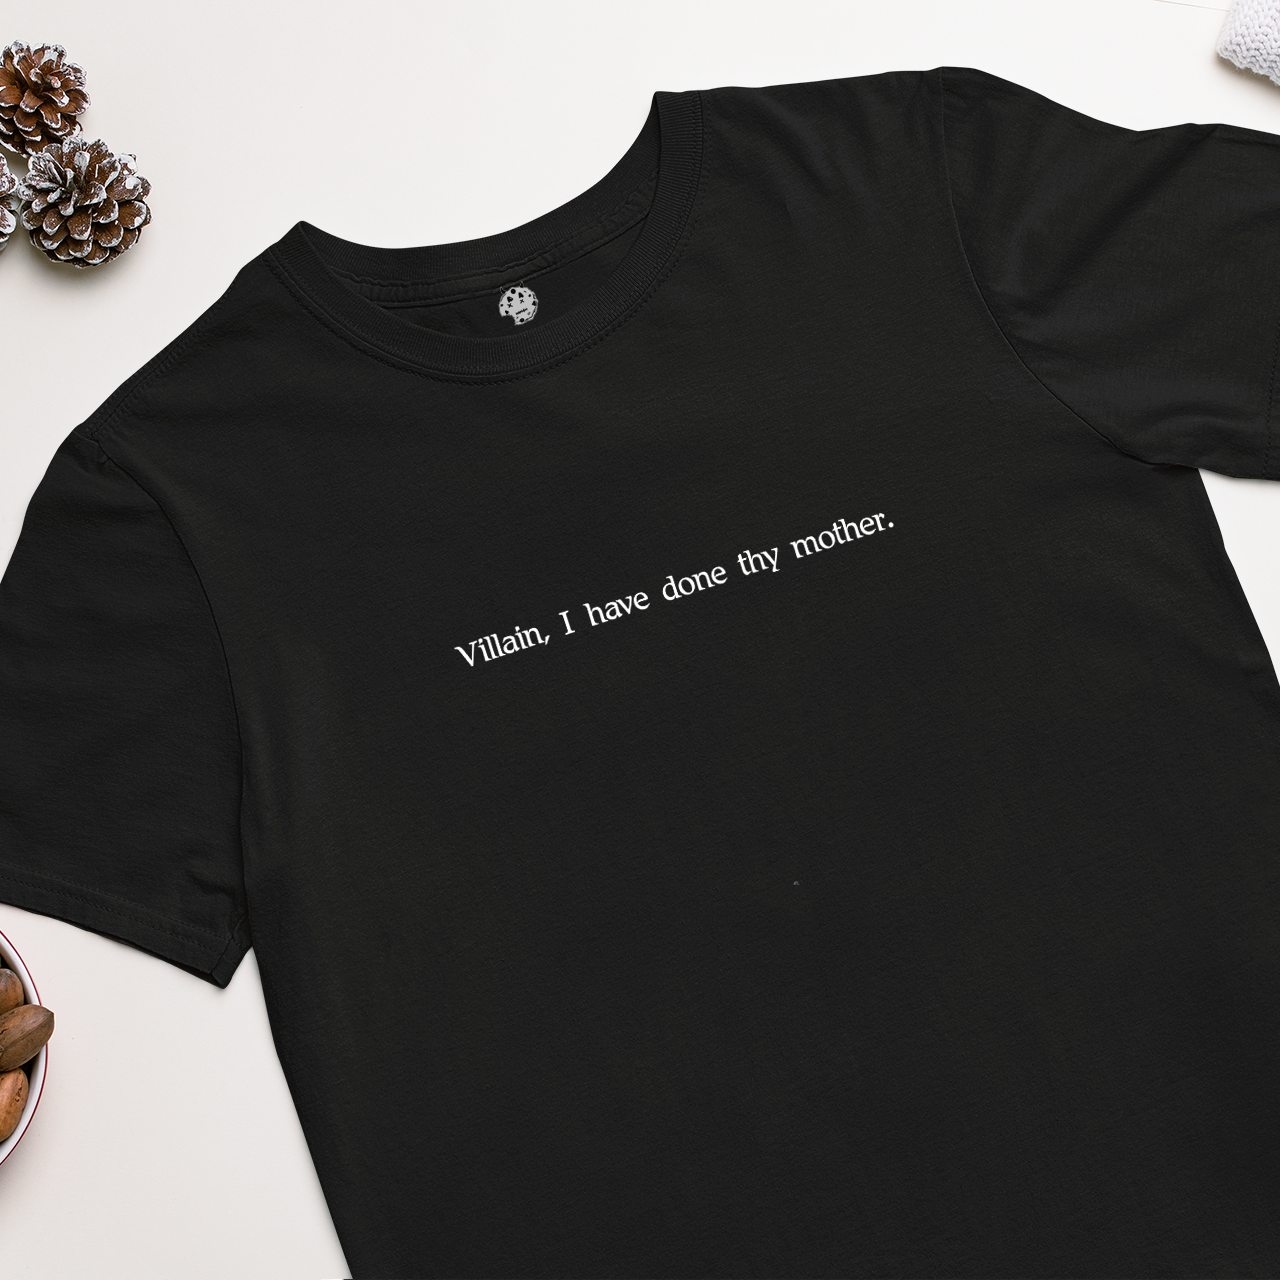 Titus Andronicus Act IV, Scene II Shakespearean insult on black t-shirt.